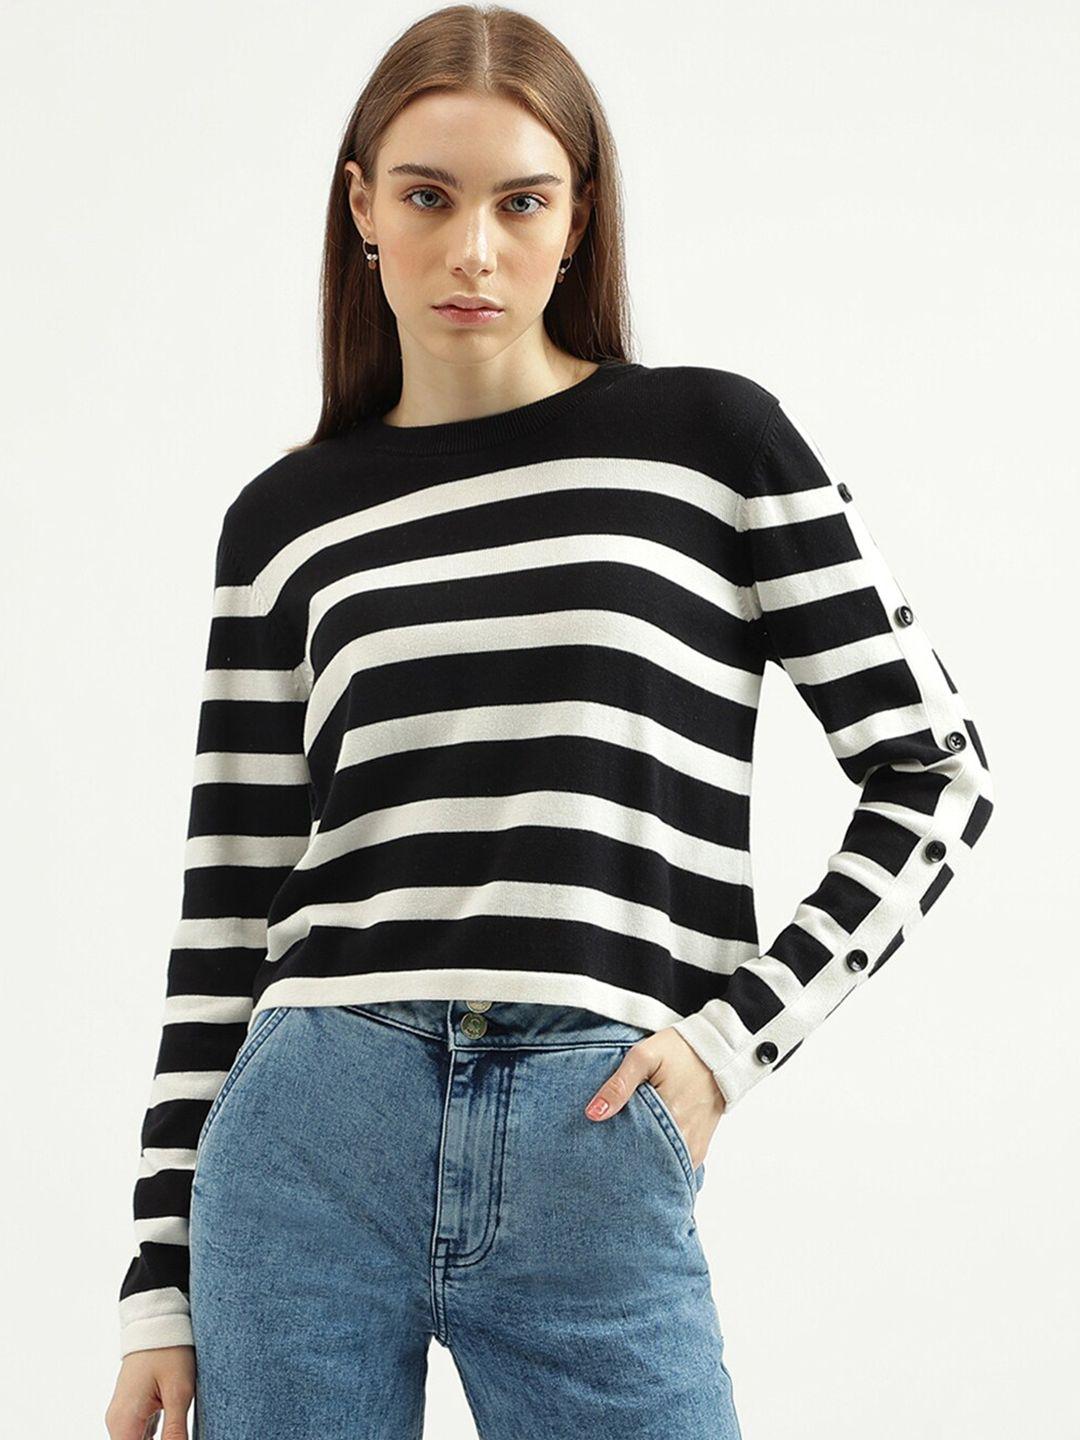 united-colors-of-benetton-striped-cotton-pullover